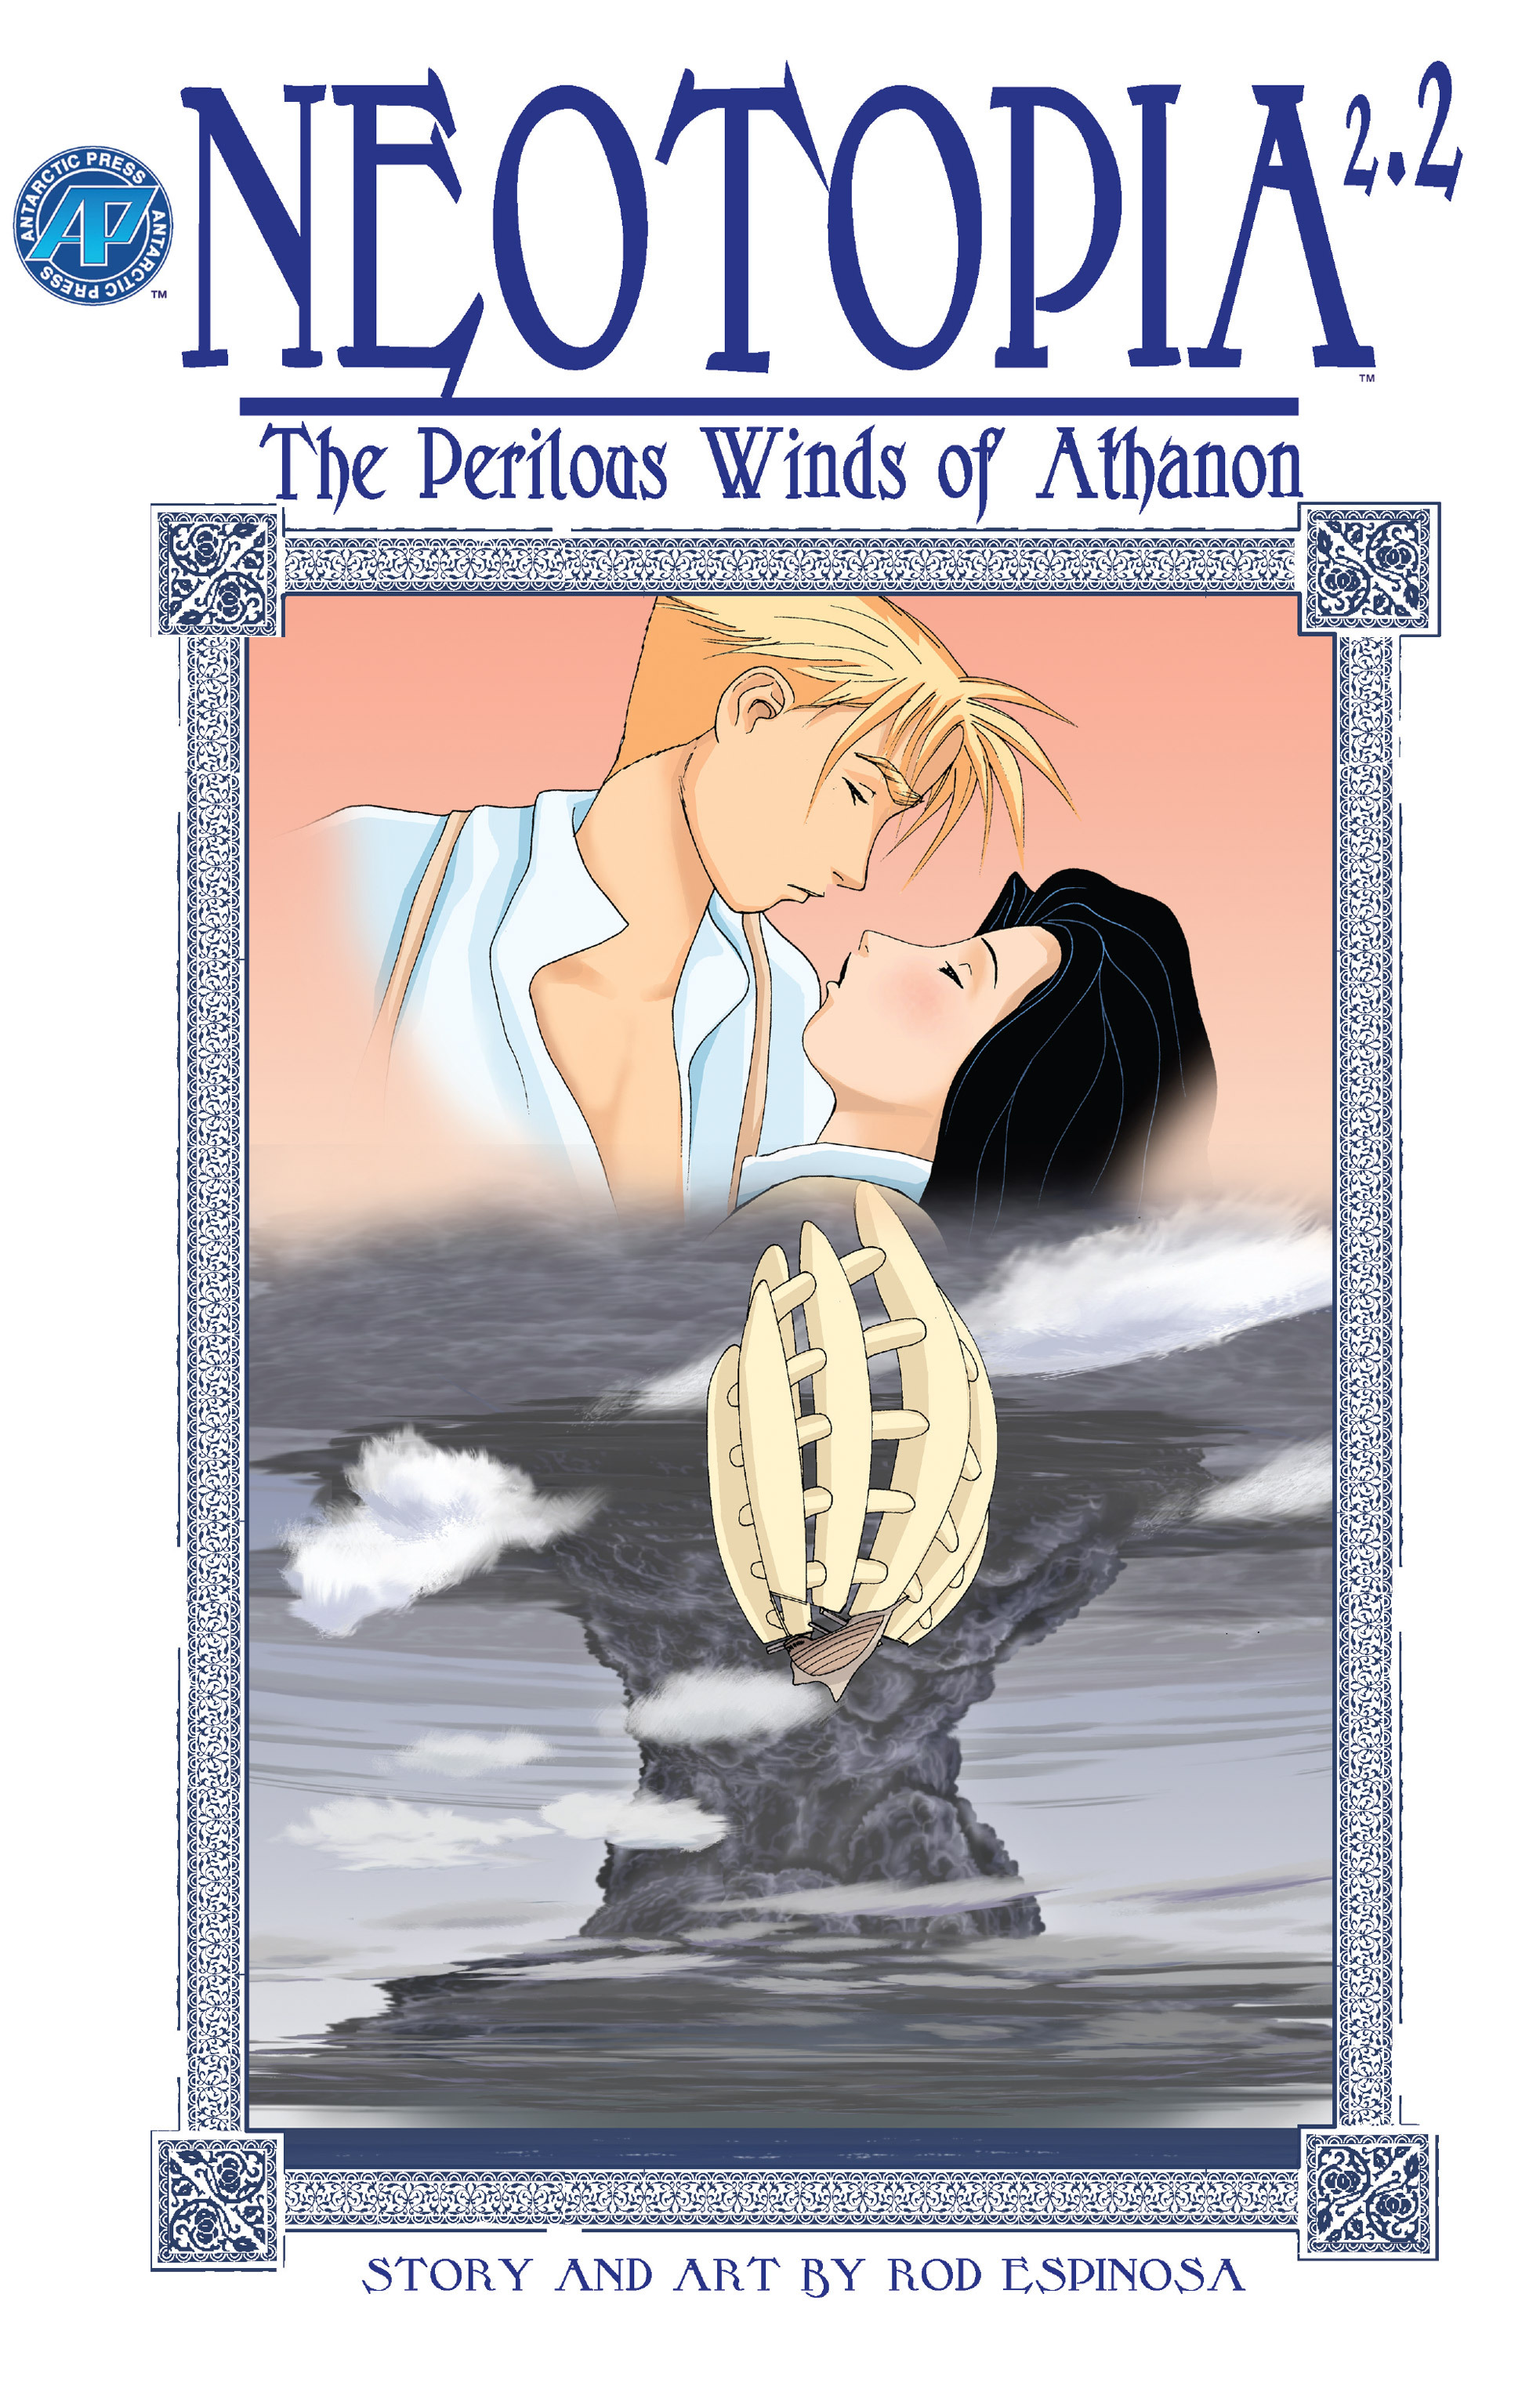 Read online Neotopia Vol. 2: The Perilous Winds of Athanon comic -  Issue #2 - 1